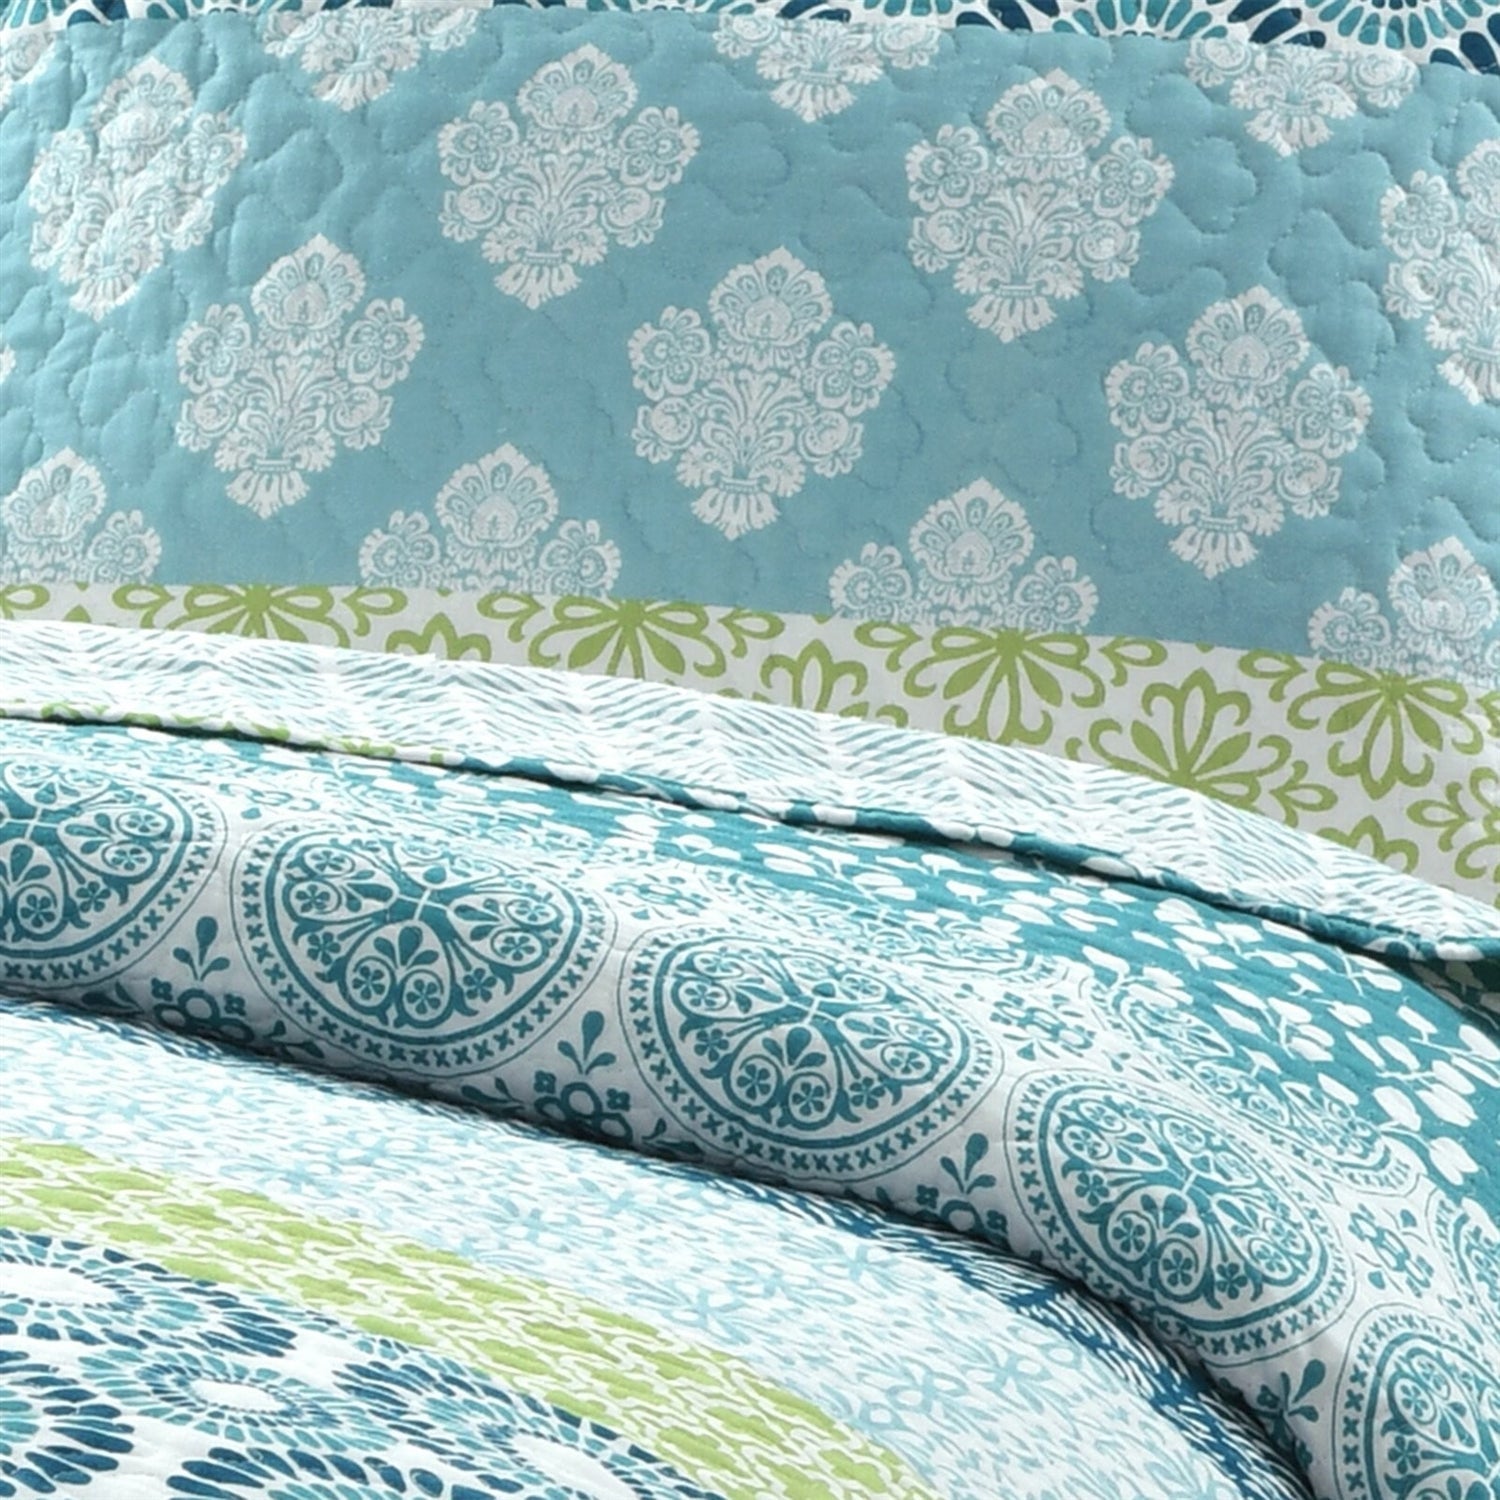 Bedroom > Quilts & Blankets - Full/Queen Cotton 3 Piece Reversible Blue White Green Floral Damask Quilt Set